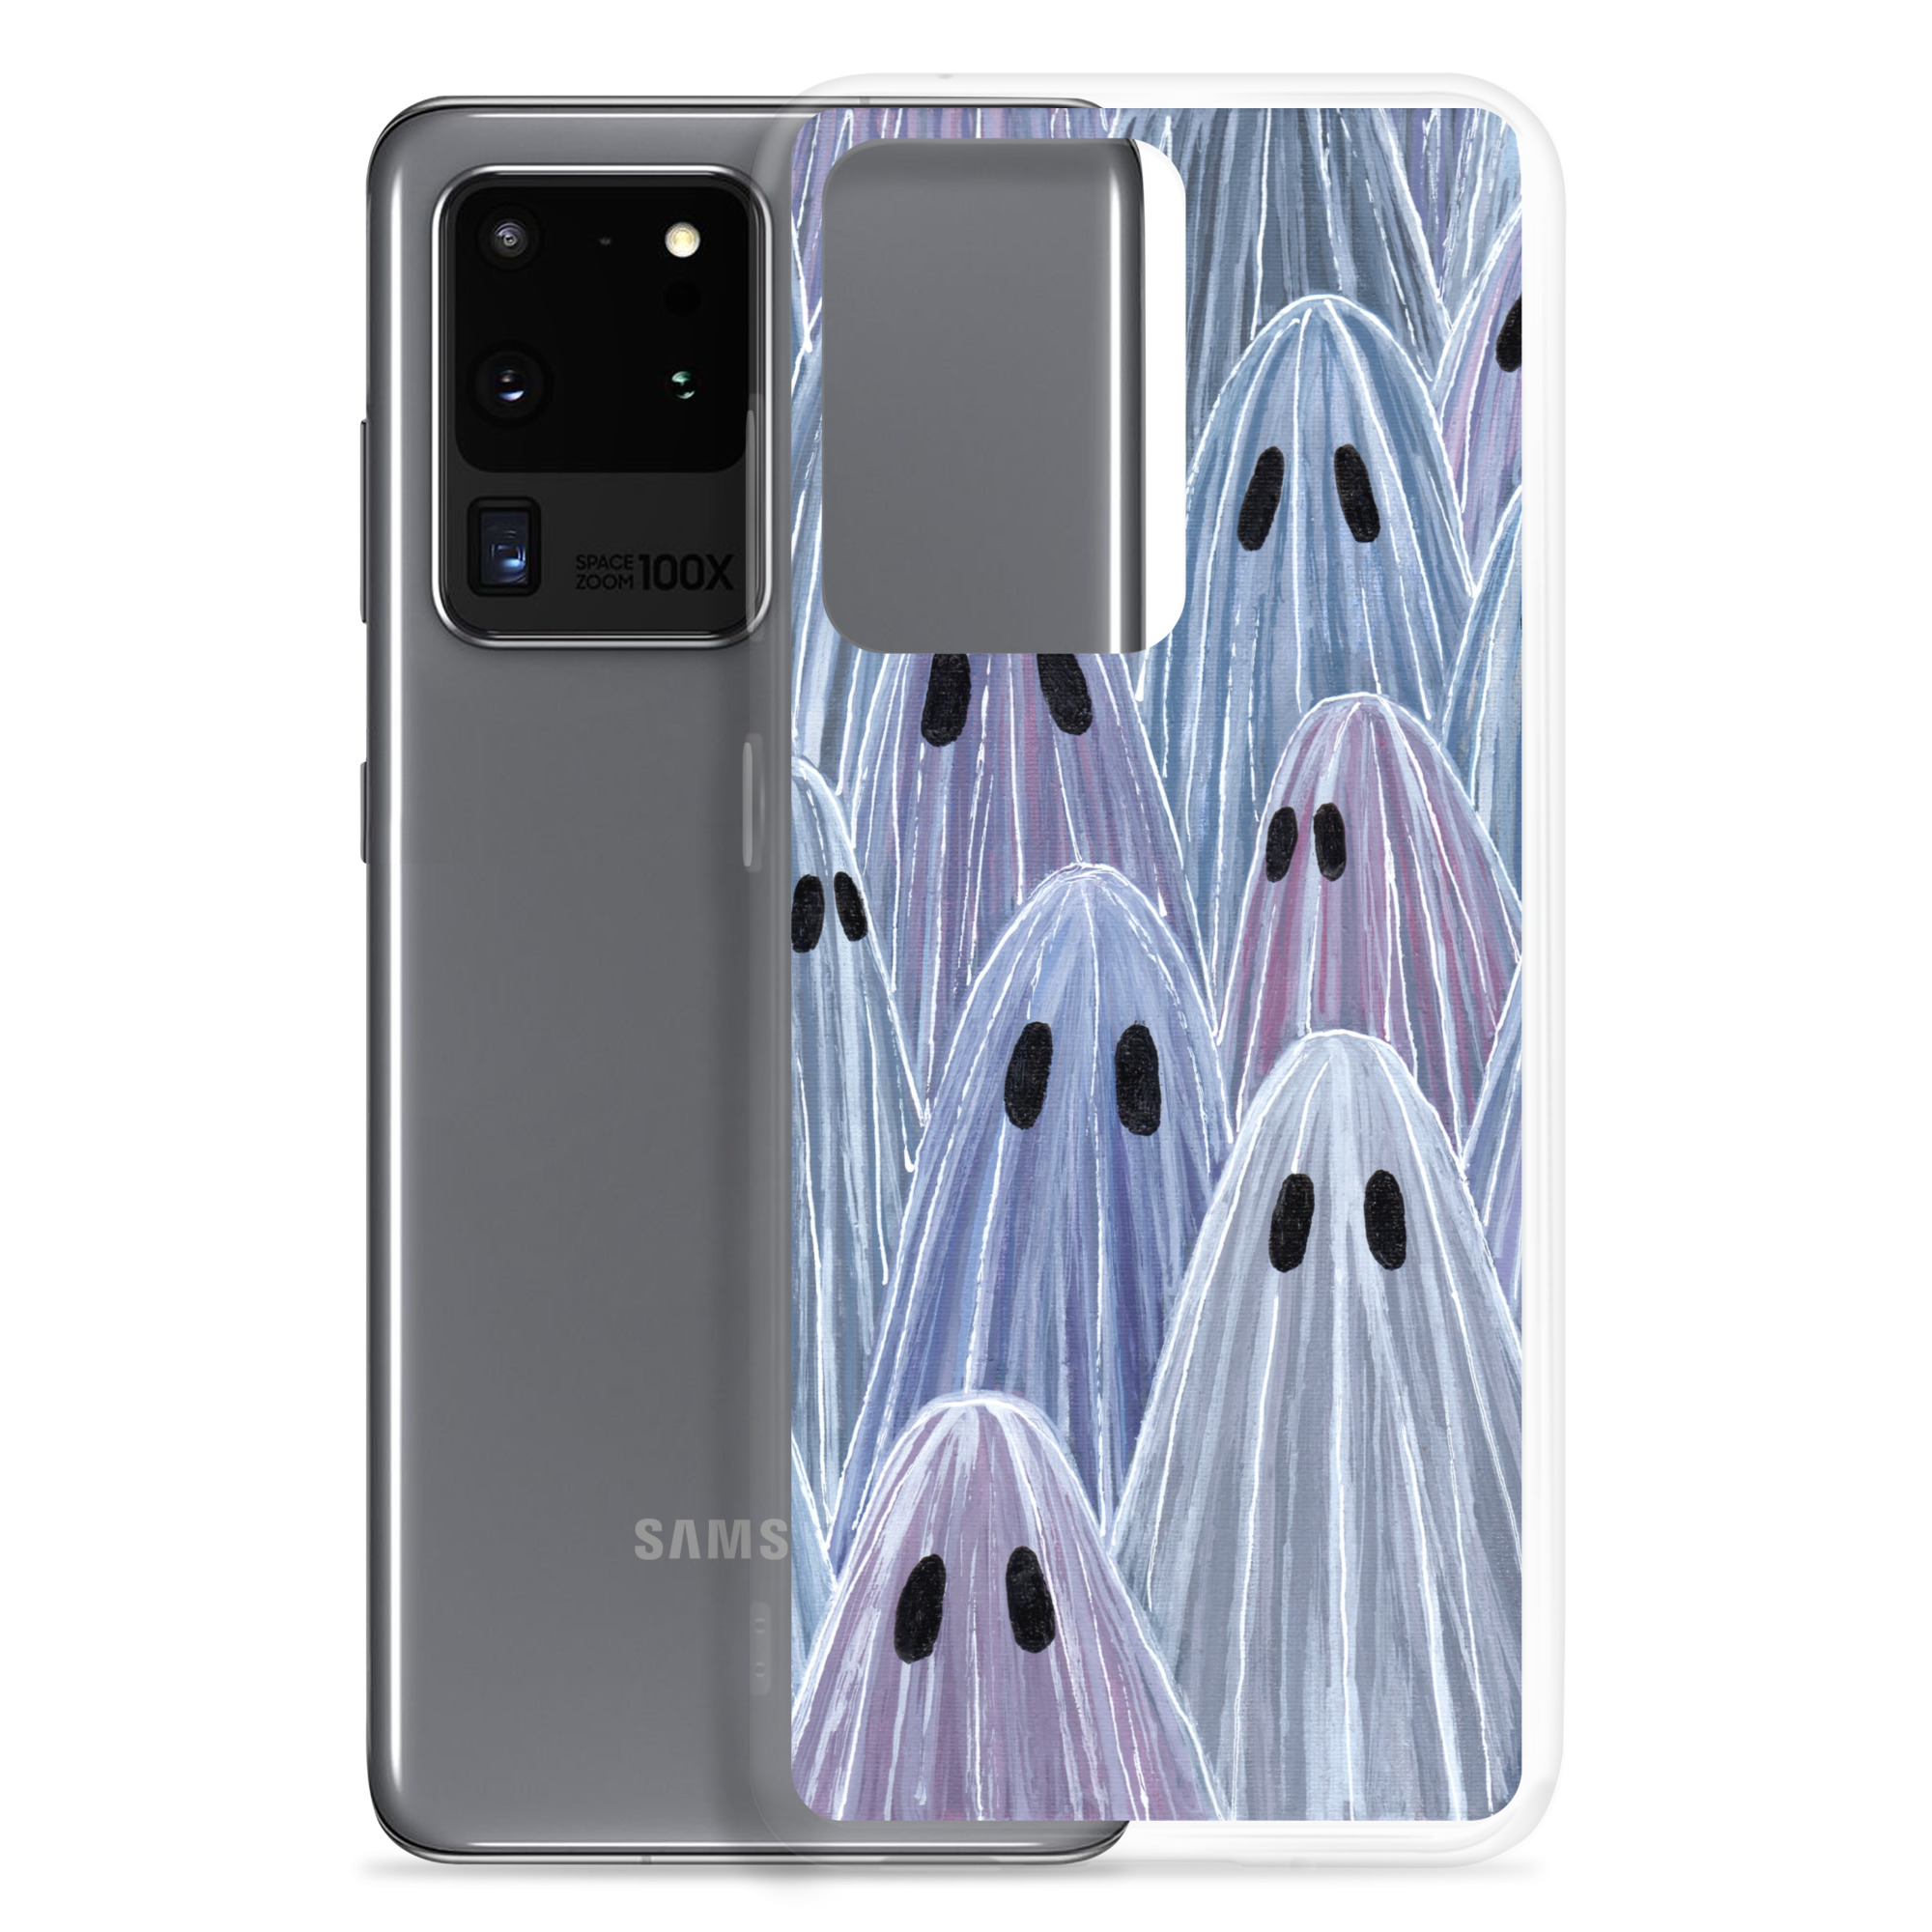 clear-case-for-samsung-samsung-galaxy-s20-ultra-case-with-phone-642b445aac923.jpg